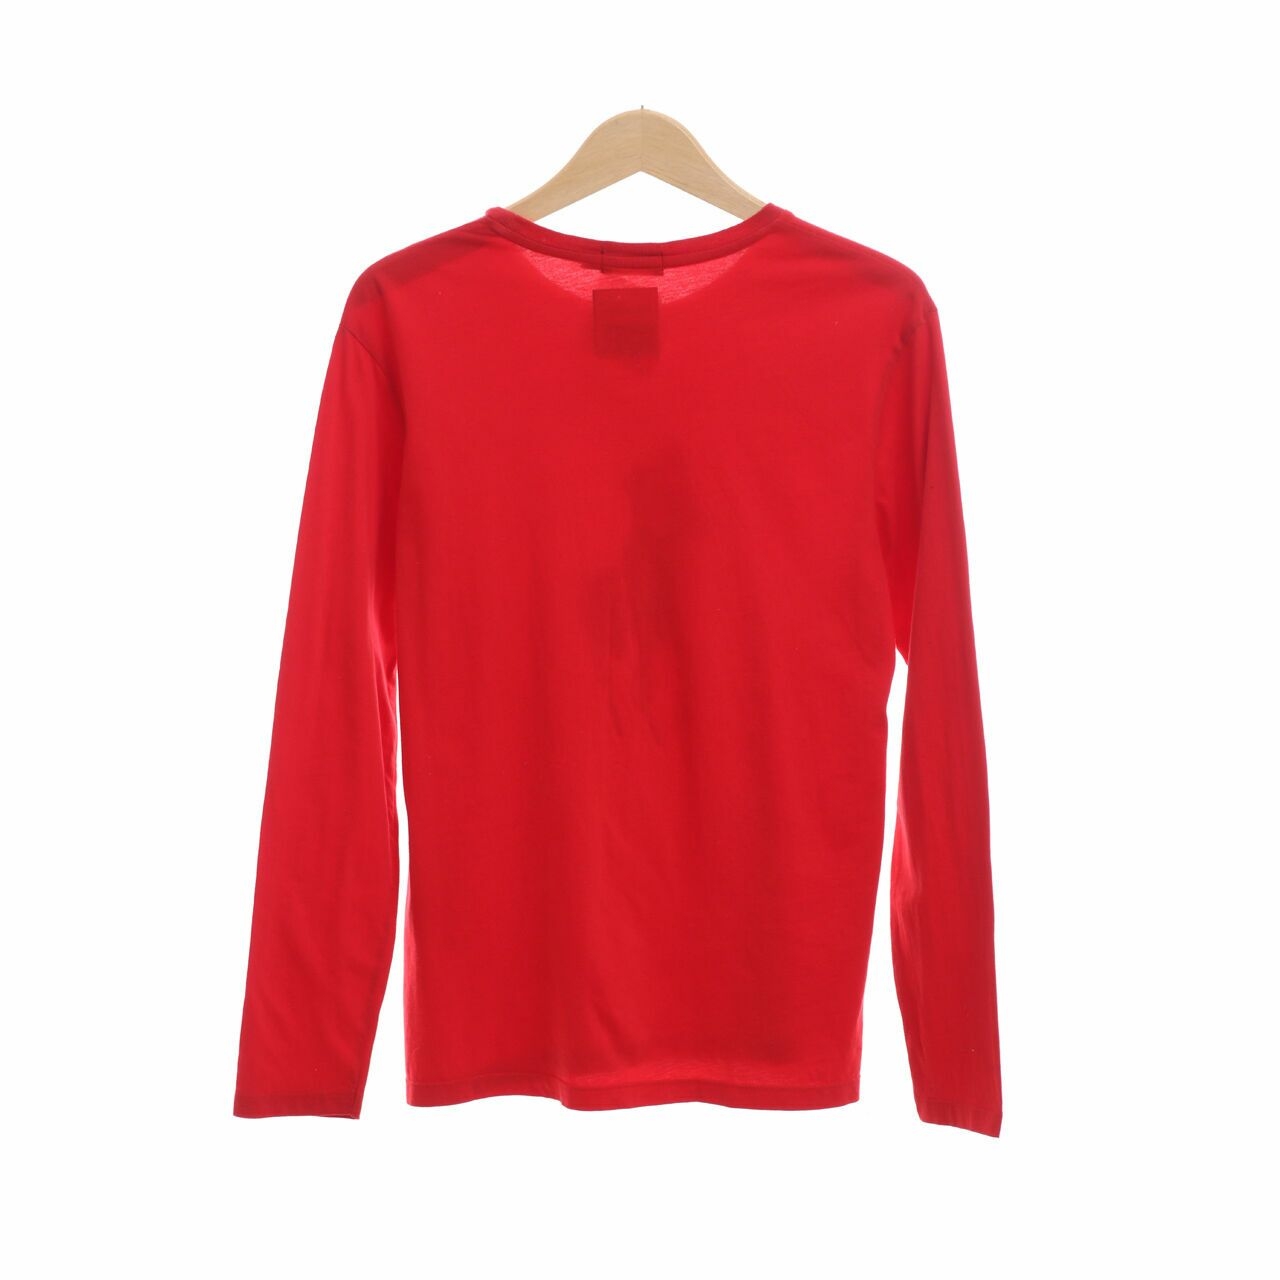 Polo Red Long SLeeve T-Shirt